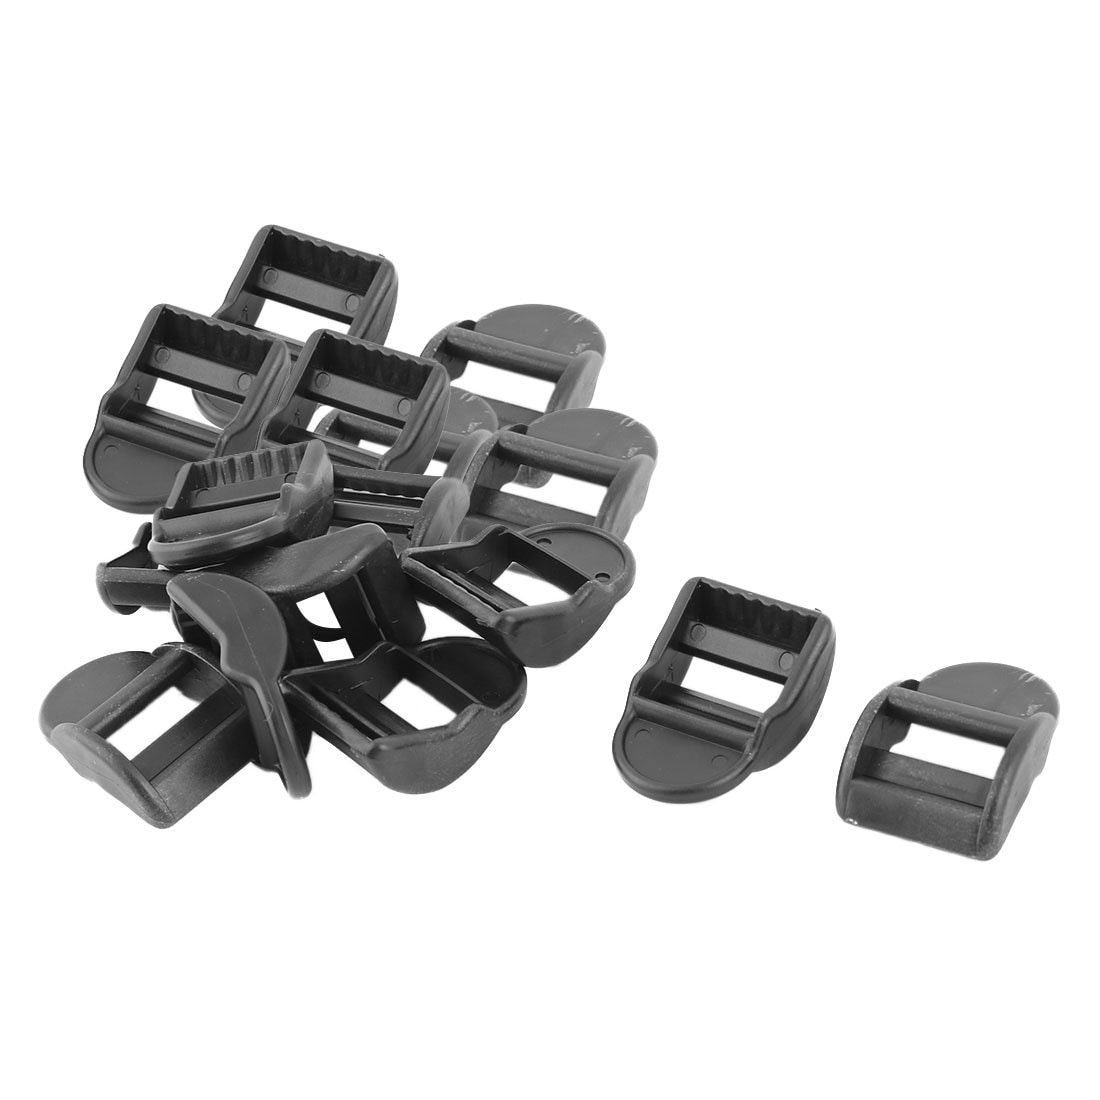 Plastic Hardware - Buckles and Rings for Strapping